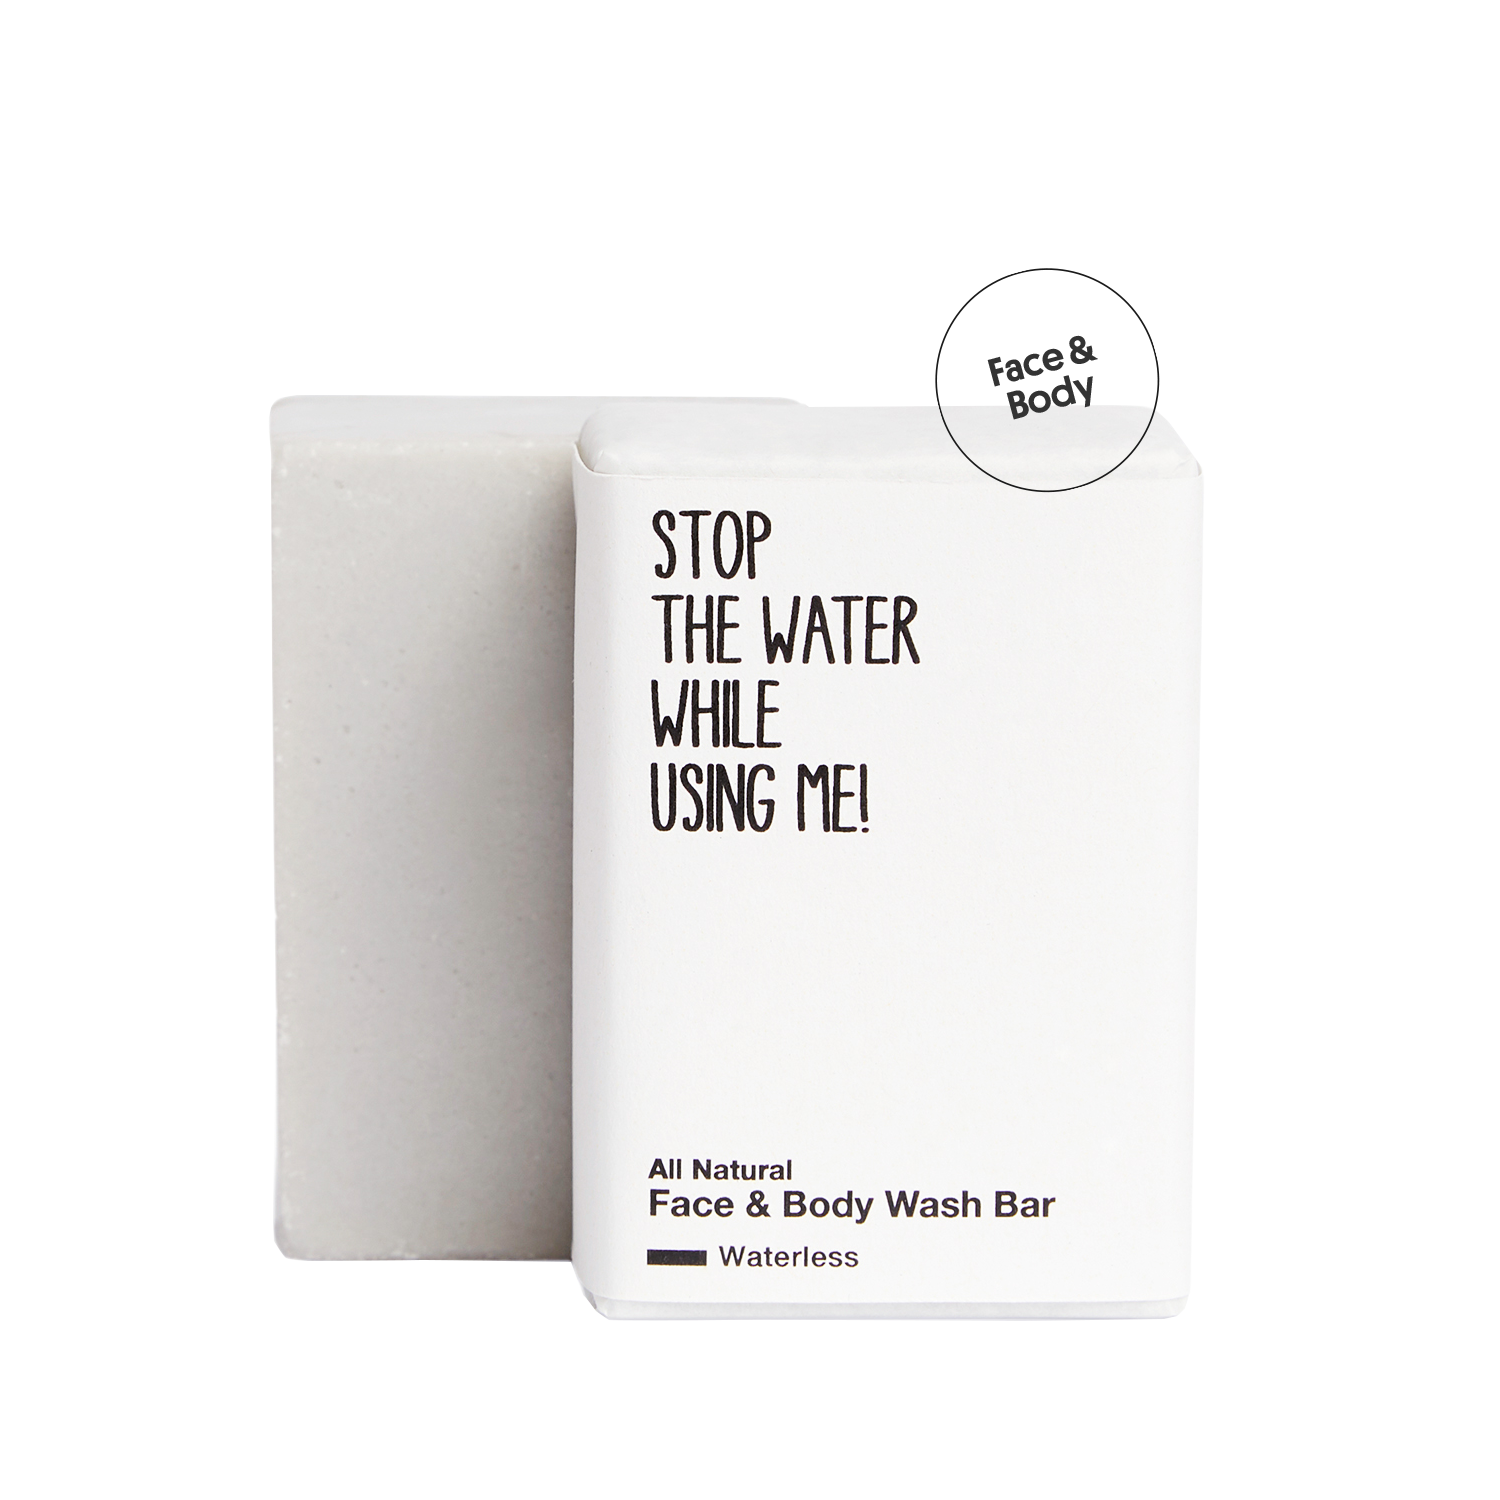 STOP THE WATER WHILE USING ME ! All Natural Face und Body Wash Bar - Waterless Edition, 105 g